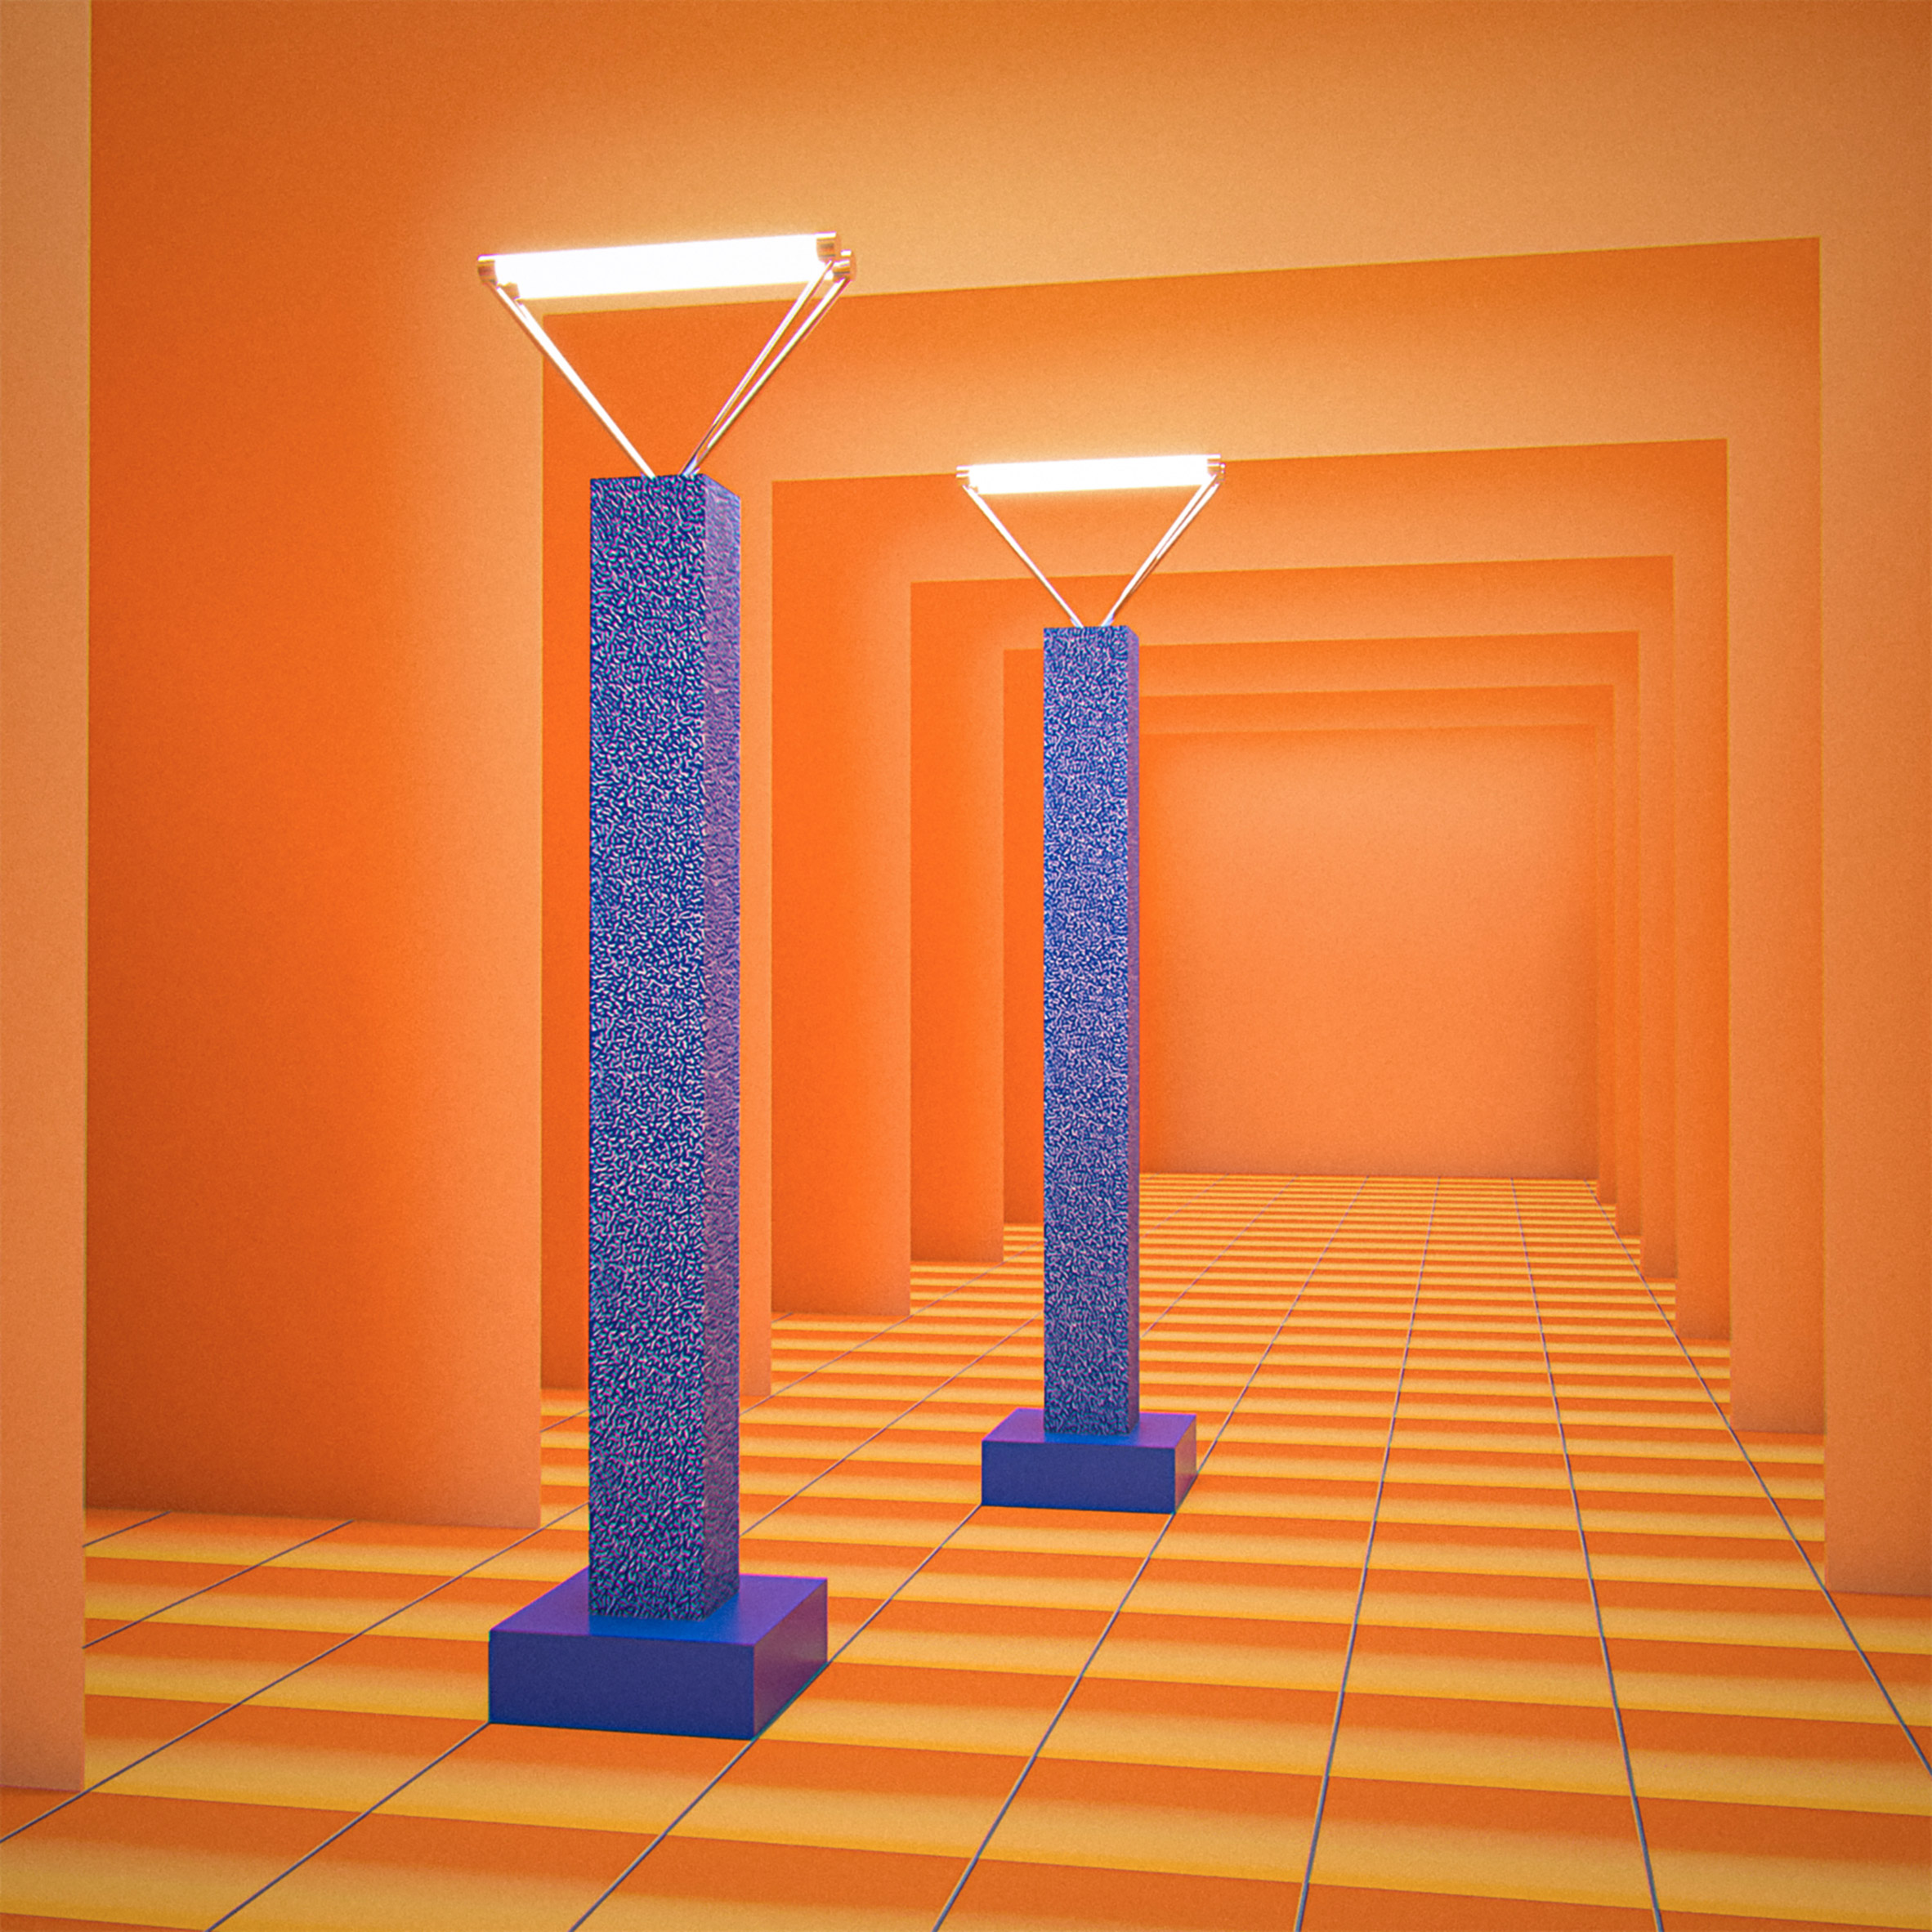 Ettore Sottsass' 1979 Svincolo floor lamps and Silent Circle's 1986 album No1